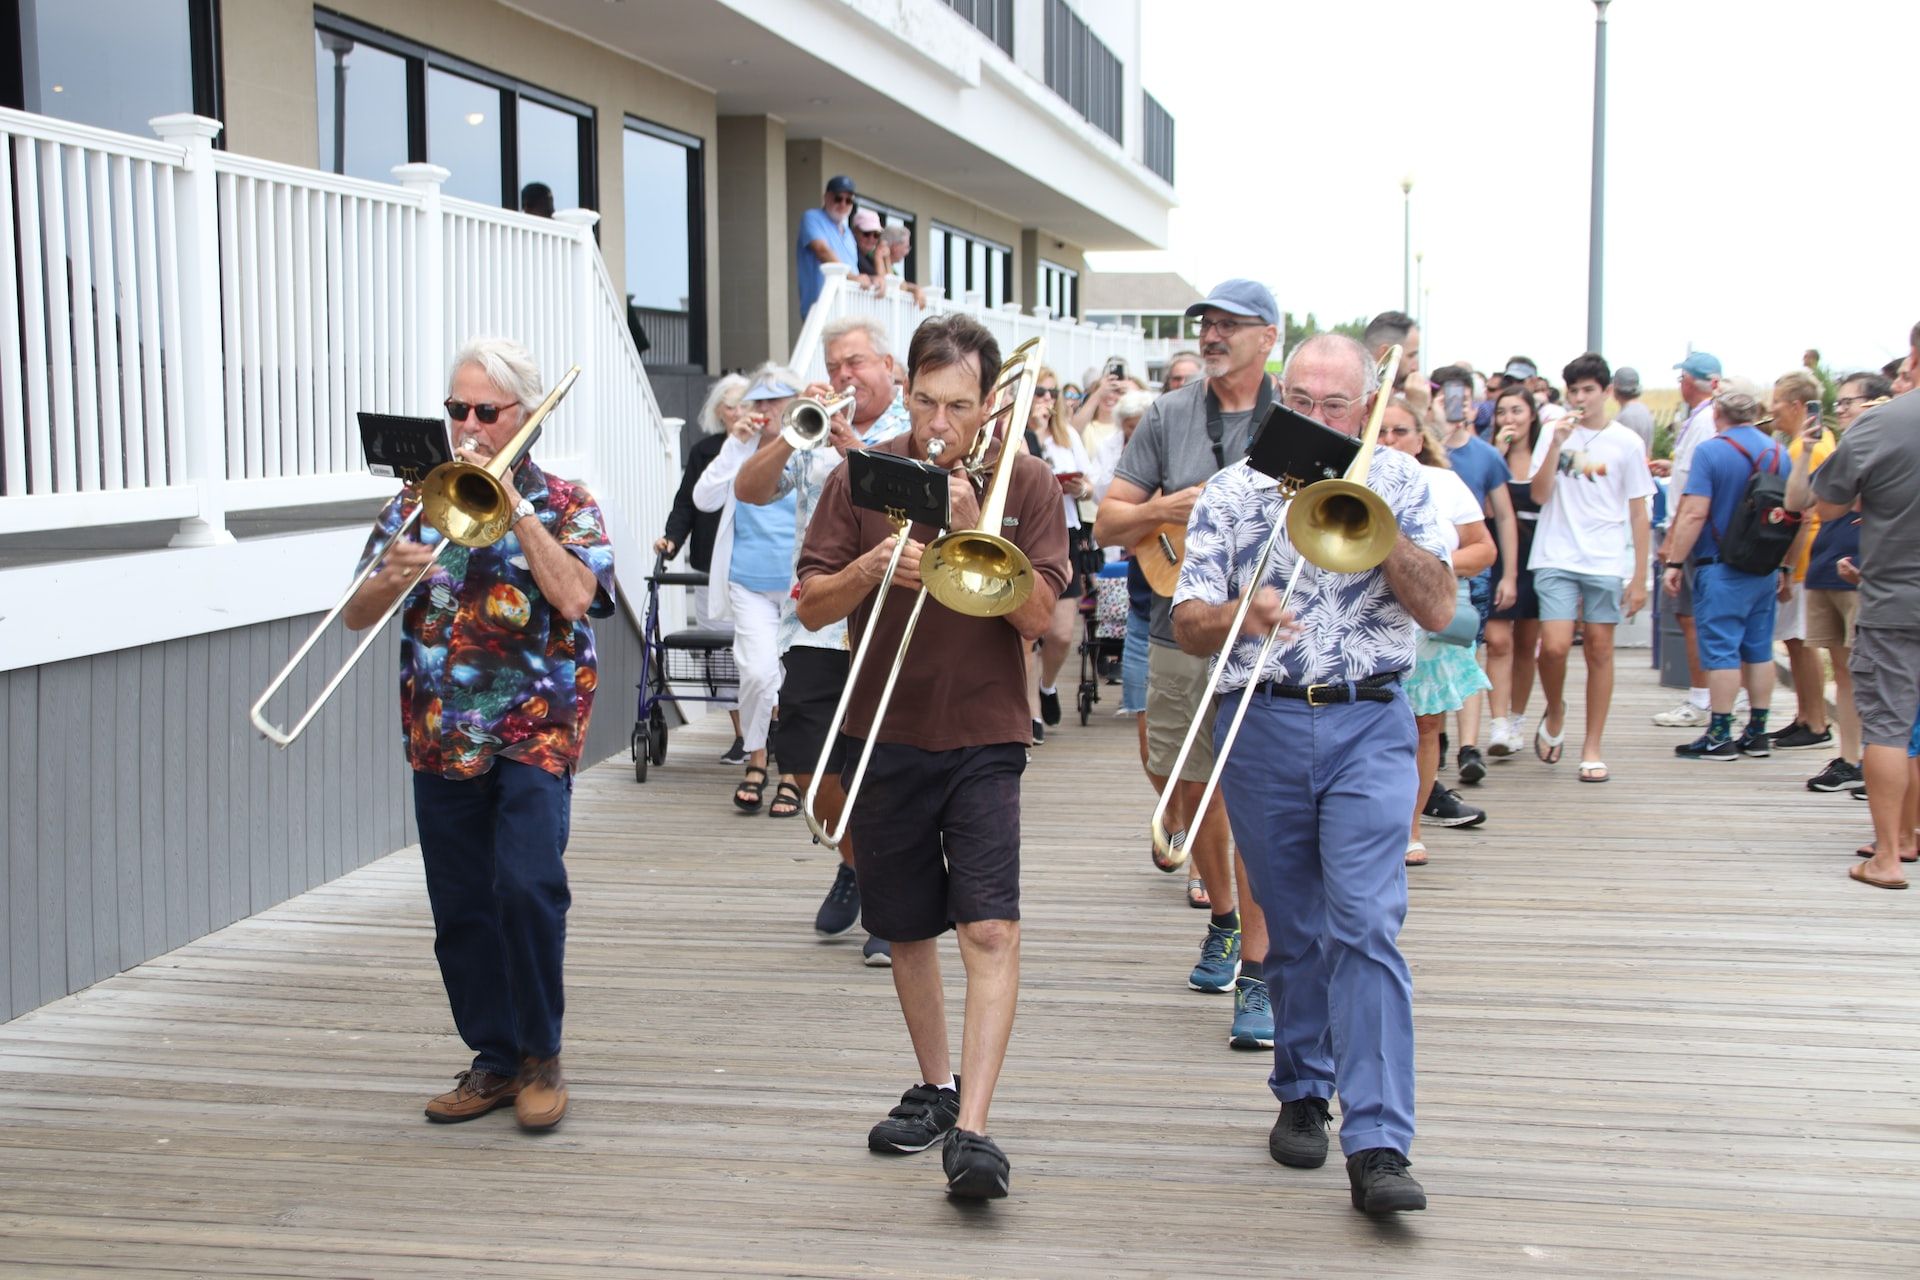 The Rehoboth Beach boardwalk is often the backdrop for live music events and other festivals.